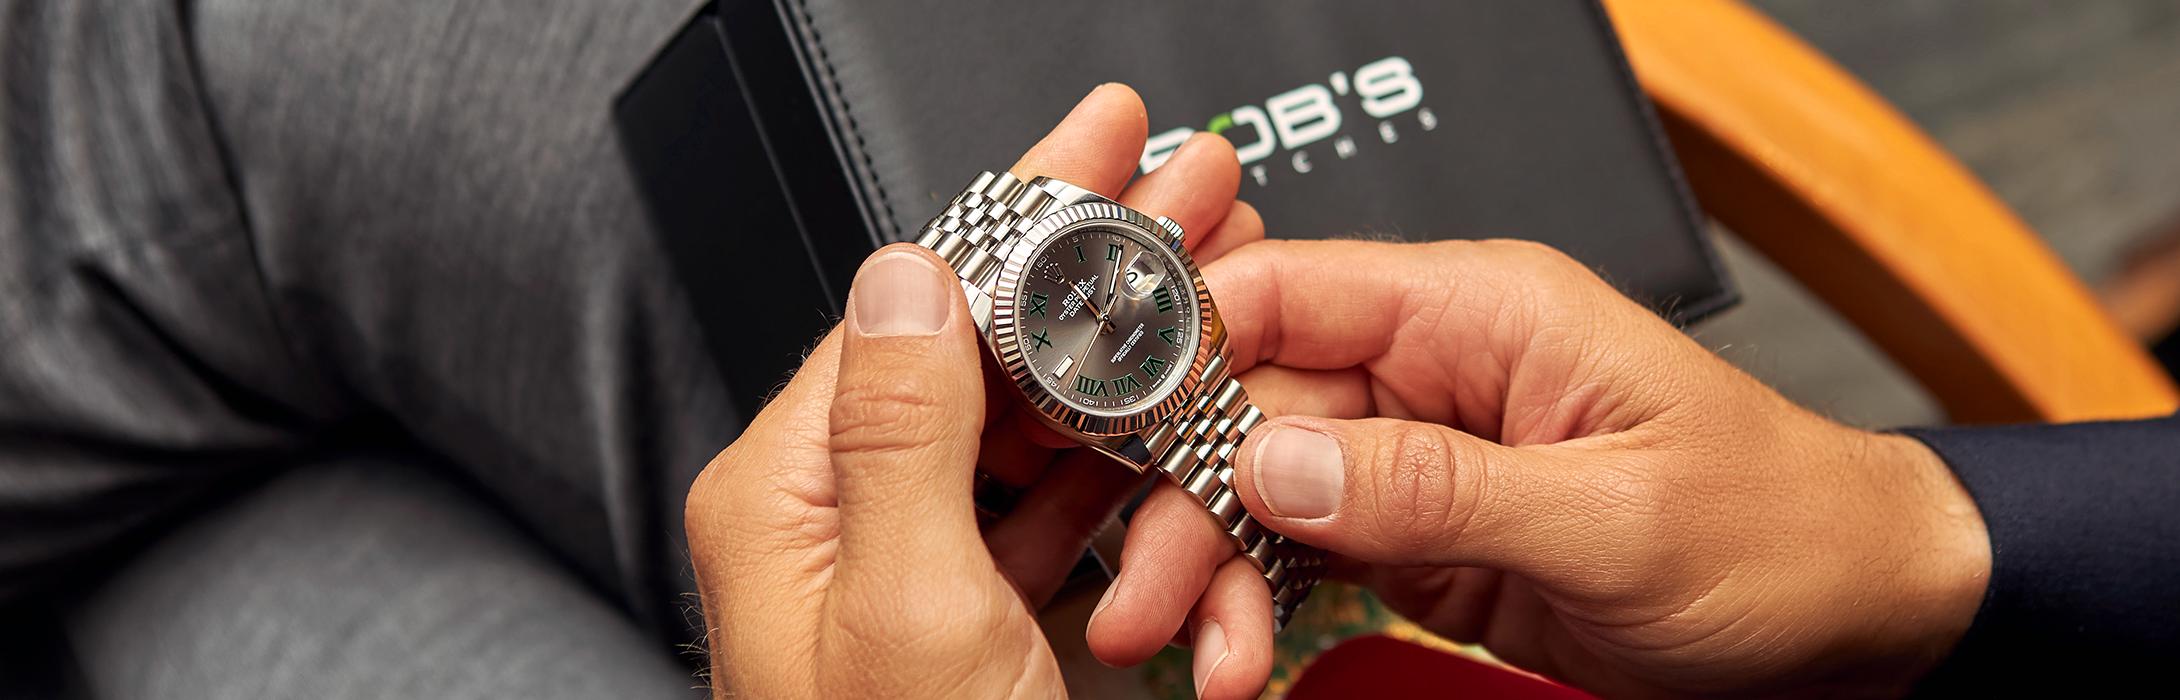 rolex-holiday-gift-guide